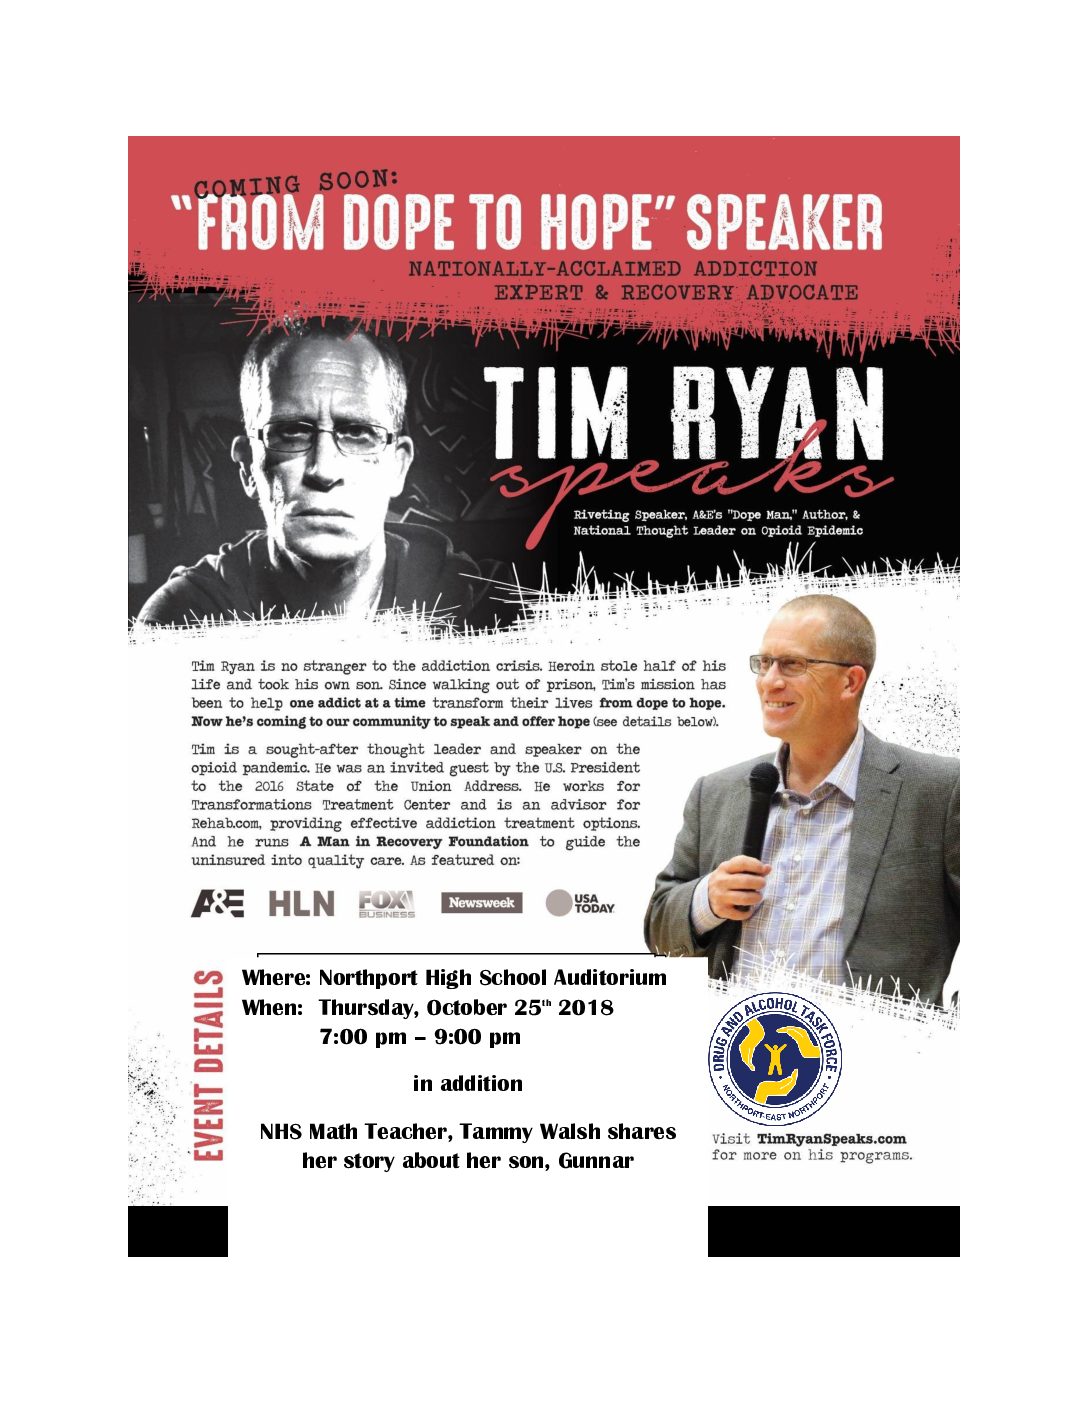 Tim Ryan Speaks:  Riveting Speaker and Thought Leader on the Opioid Epidemic